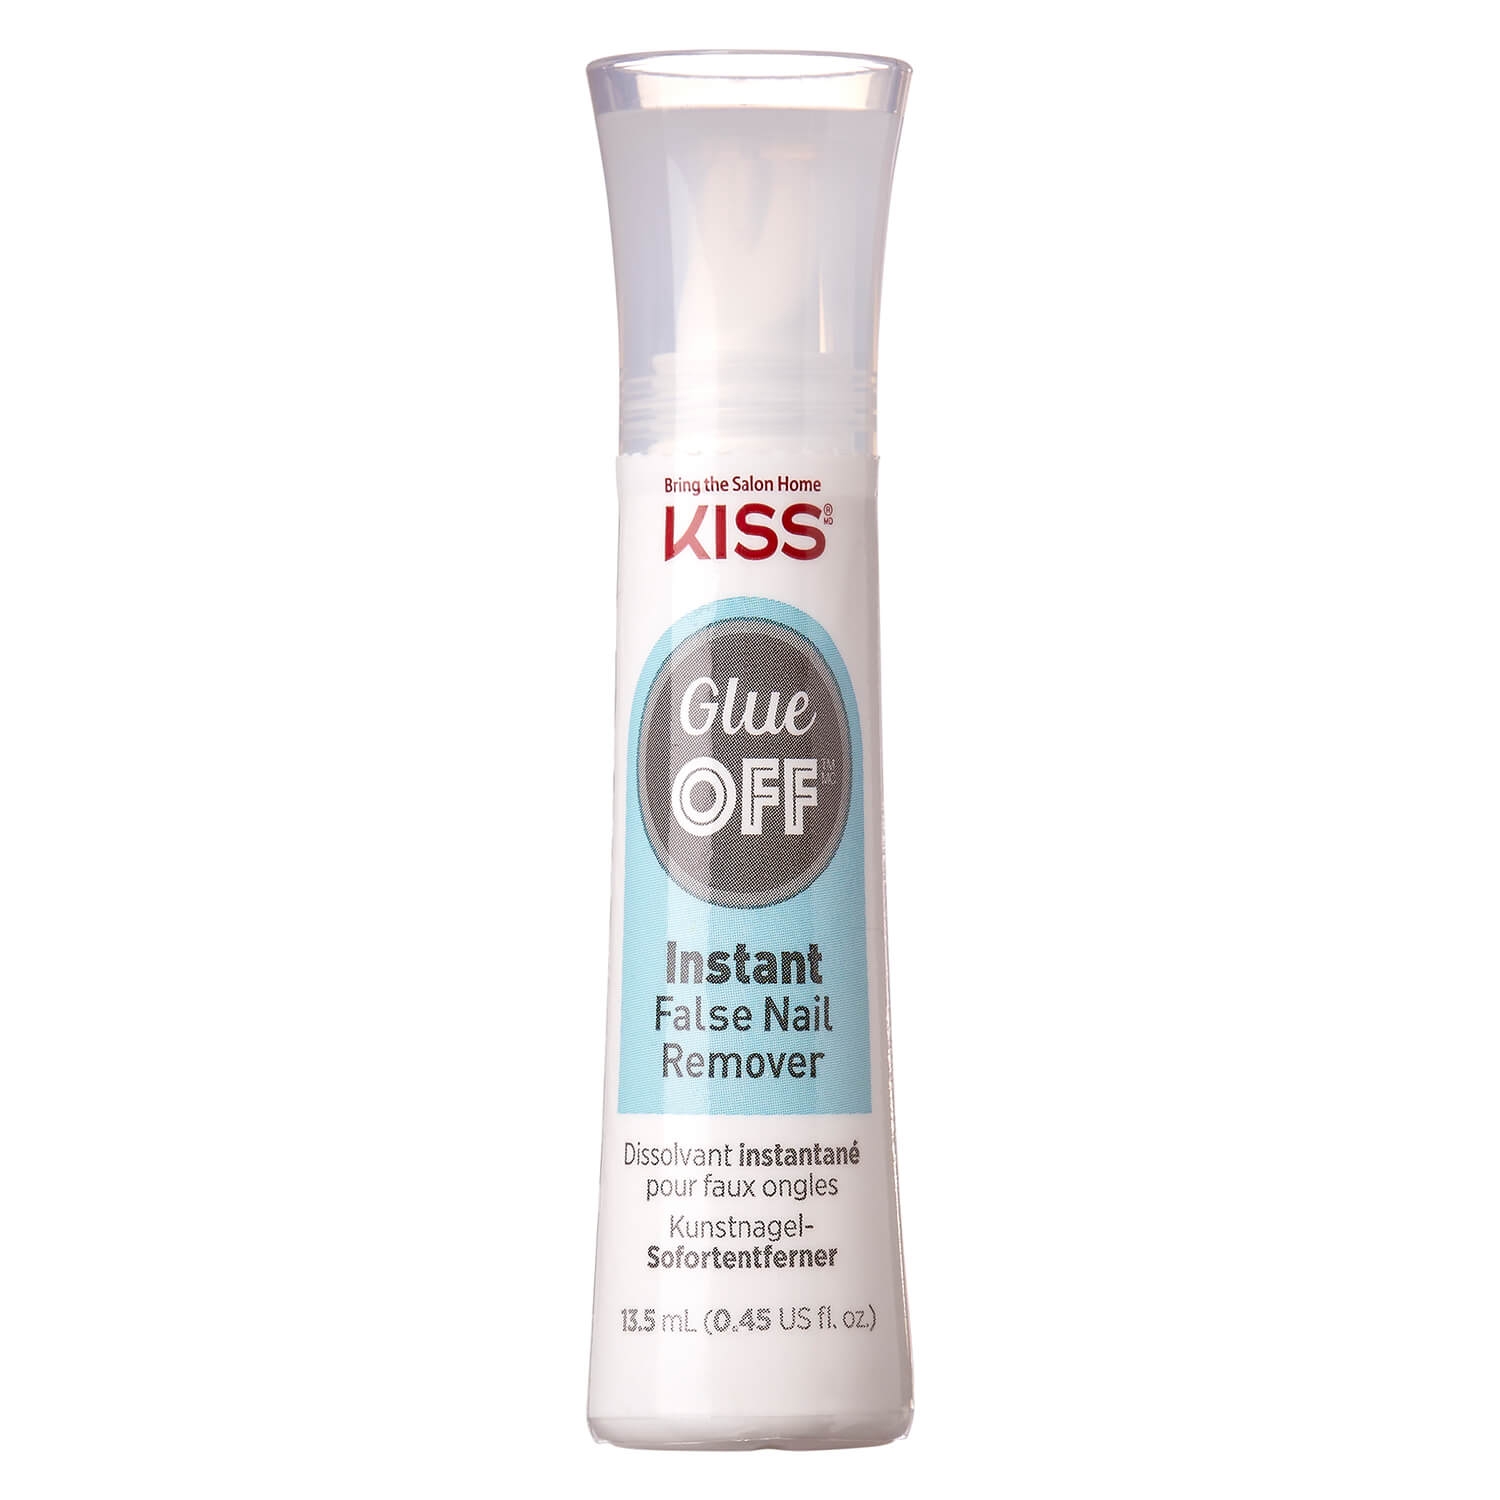 Product image from KISS Nails - Glue OFF Instant False Nail Remover